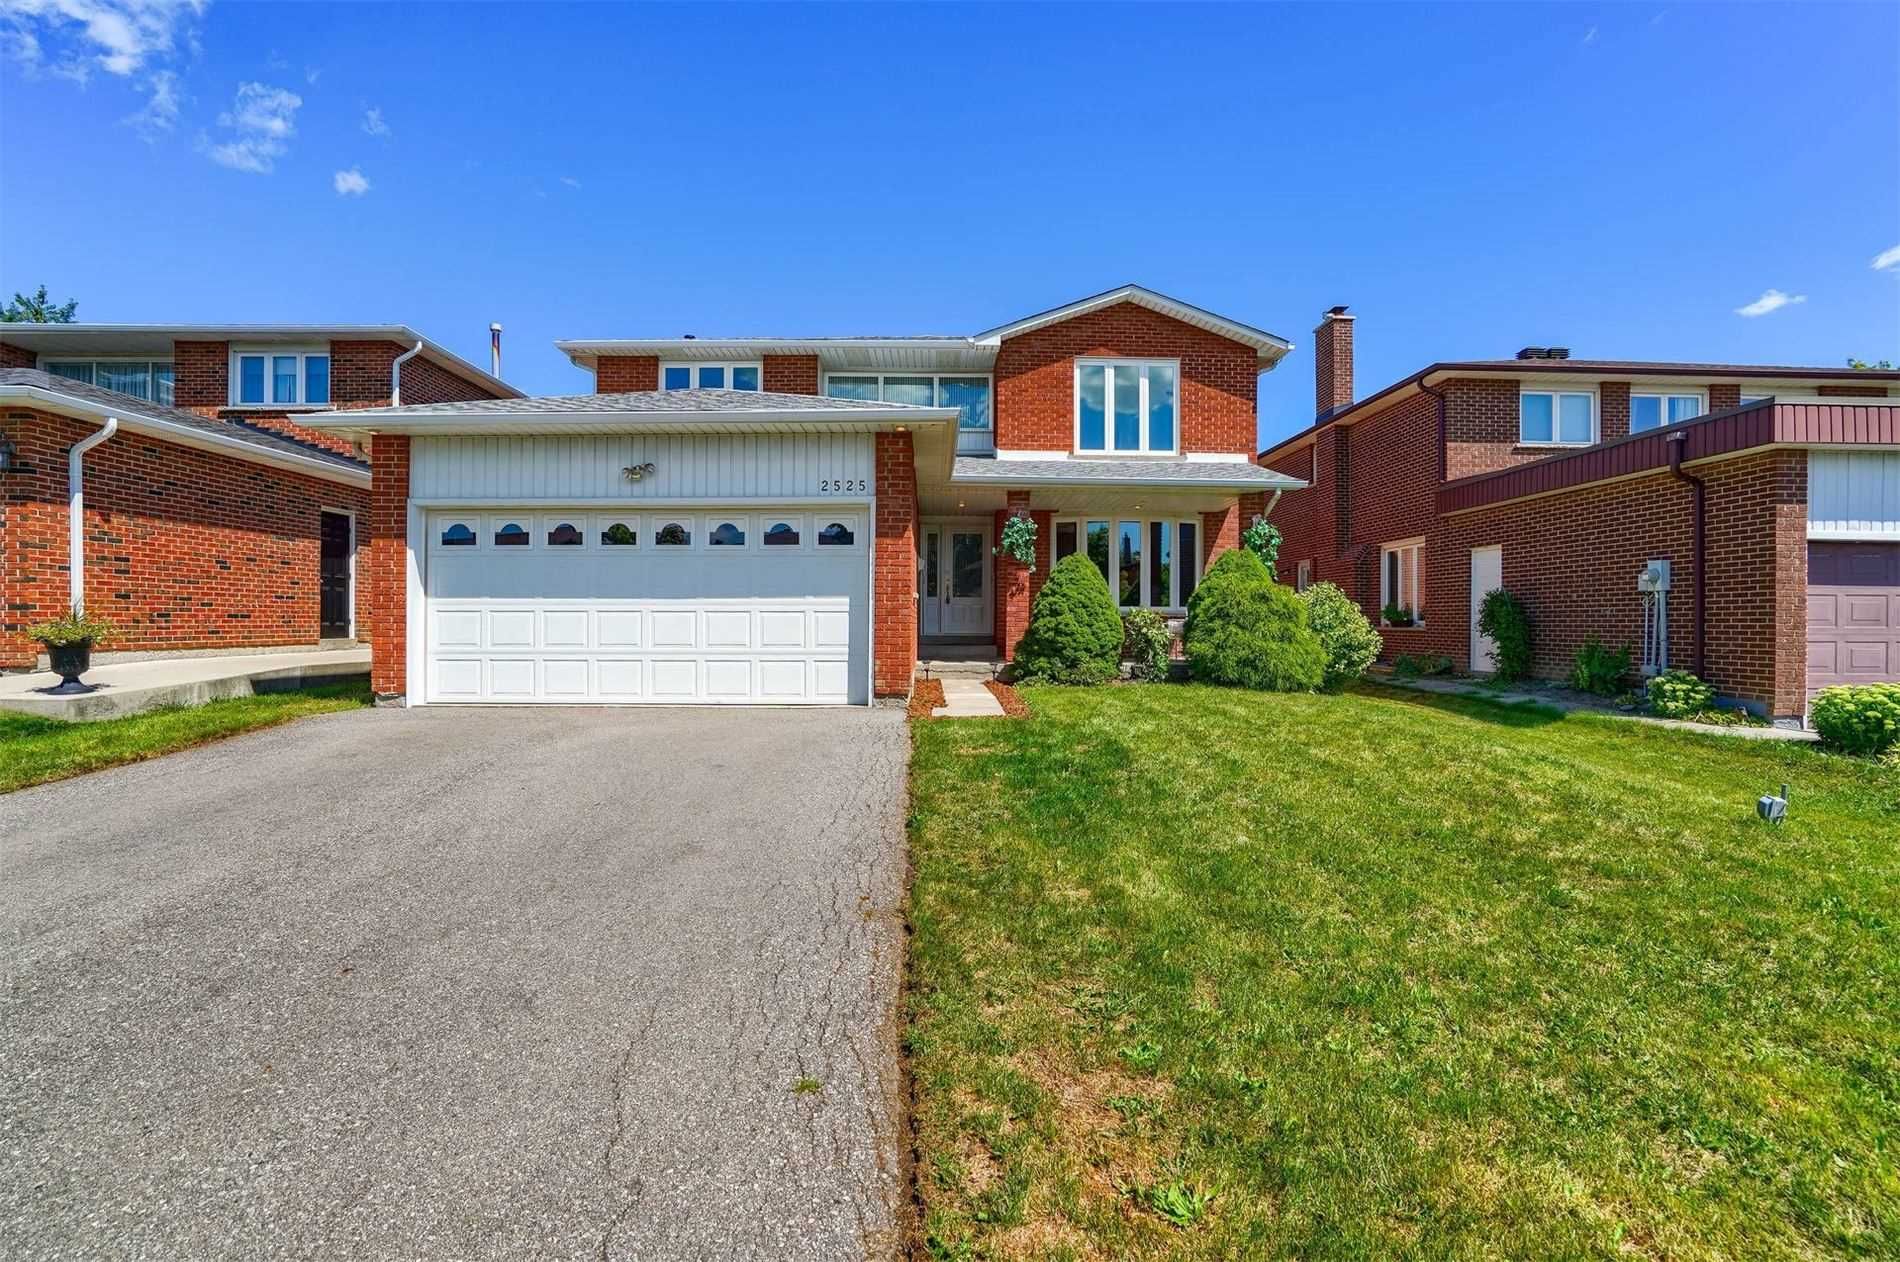 Main Photo: 2525 Pollard Drive in Mississauga: Erindale House (2-Storey) for sale : MLS®# W4887592